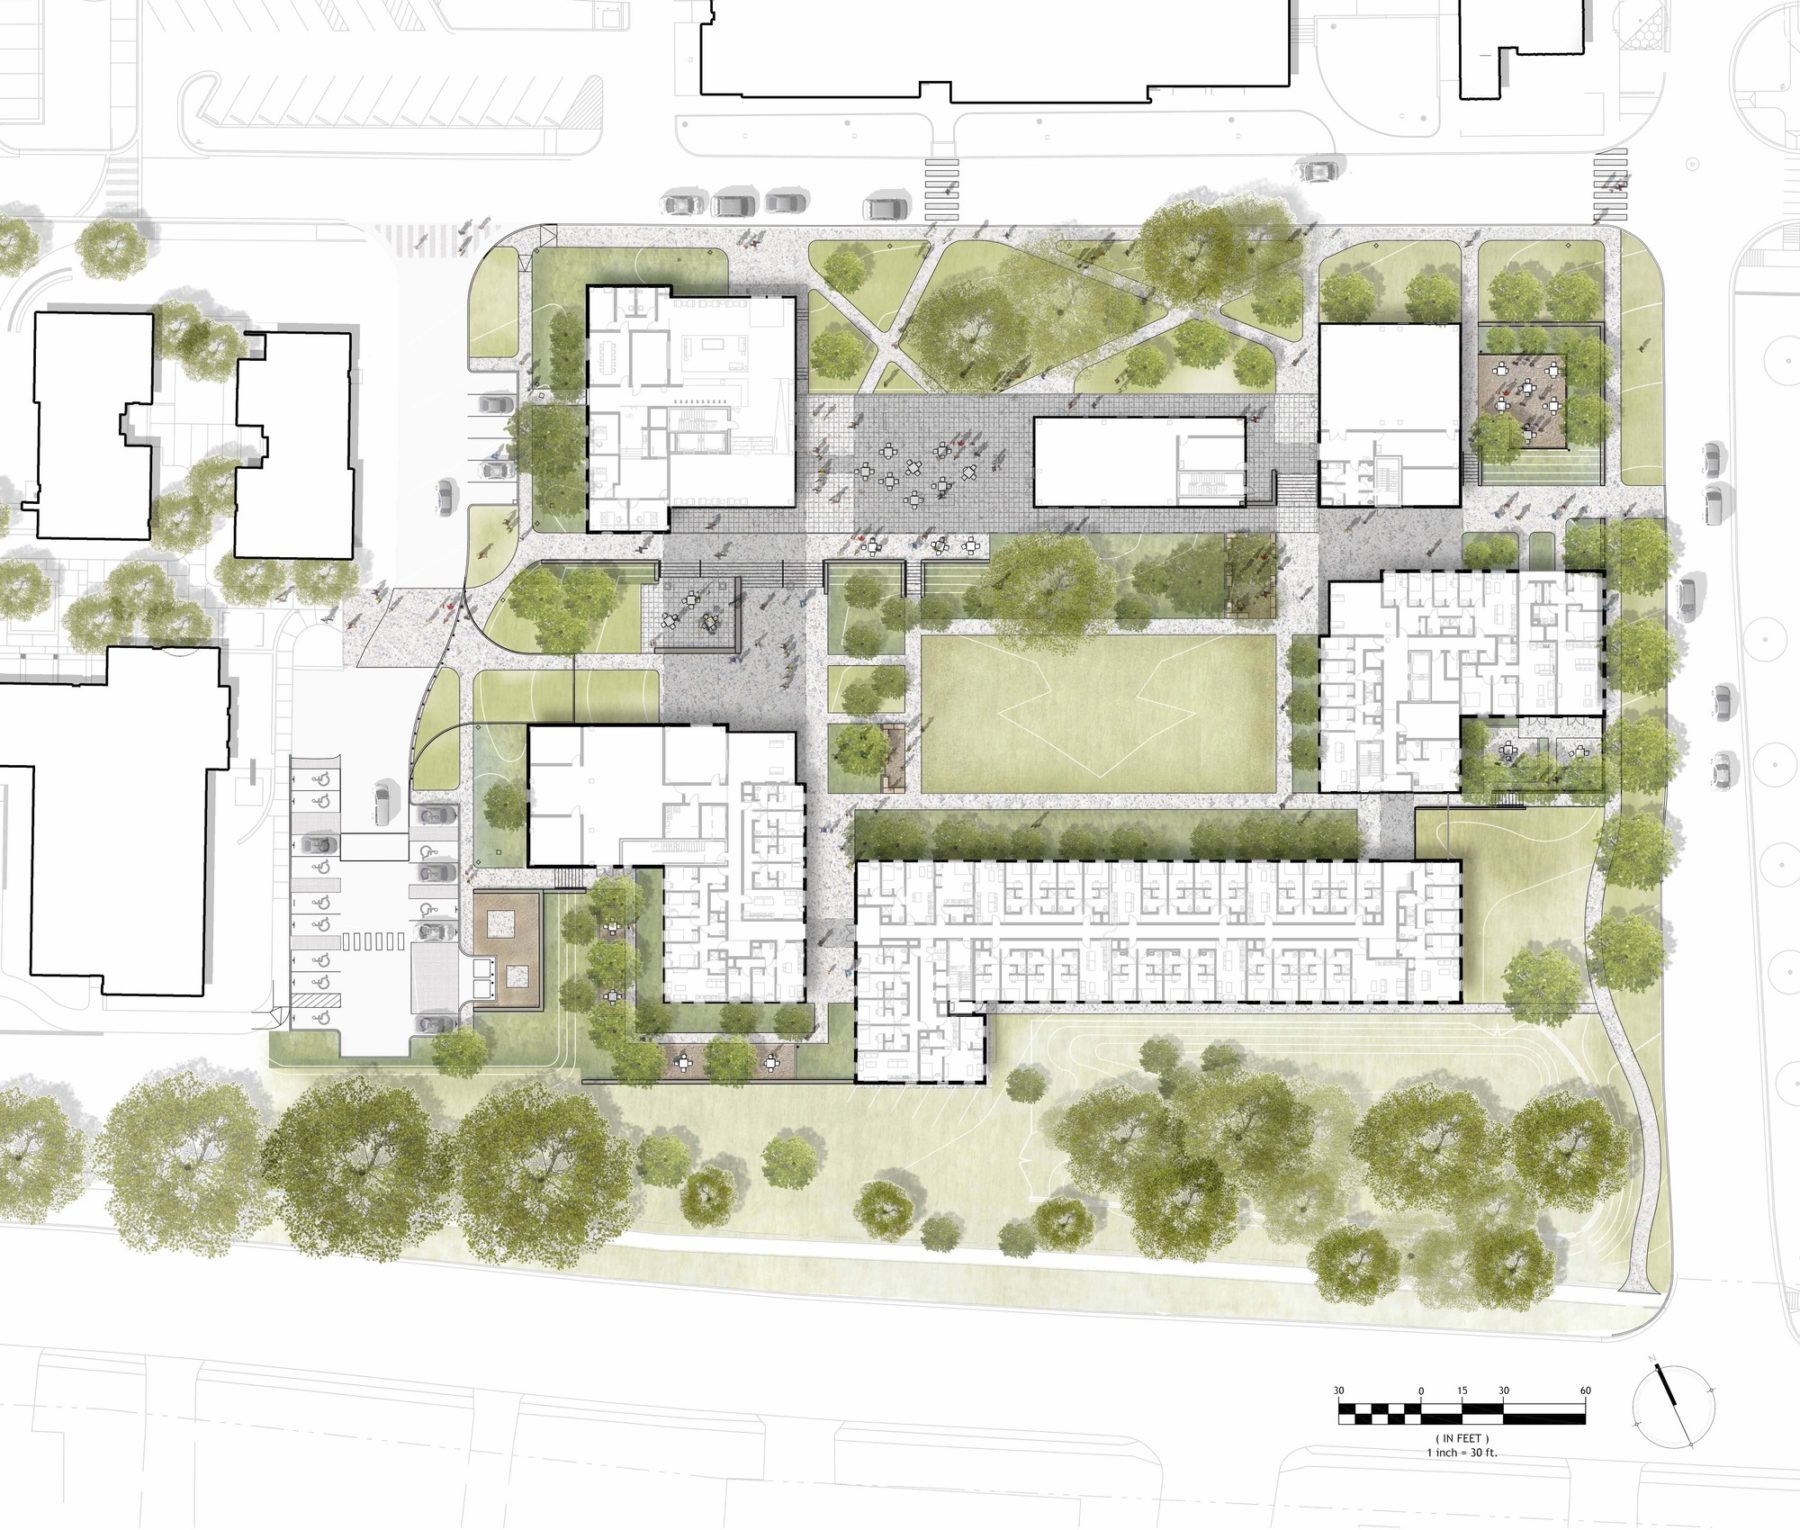 site plan of new residence hall